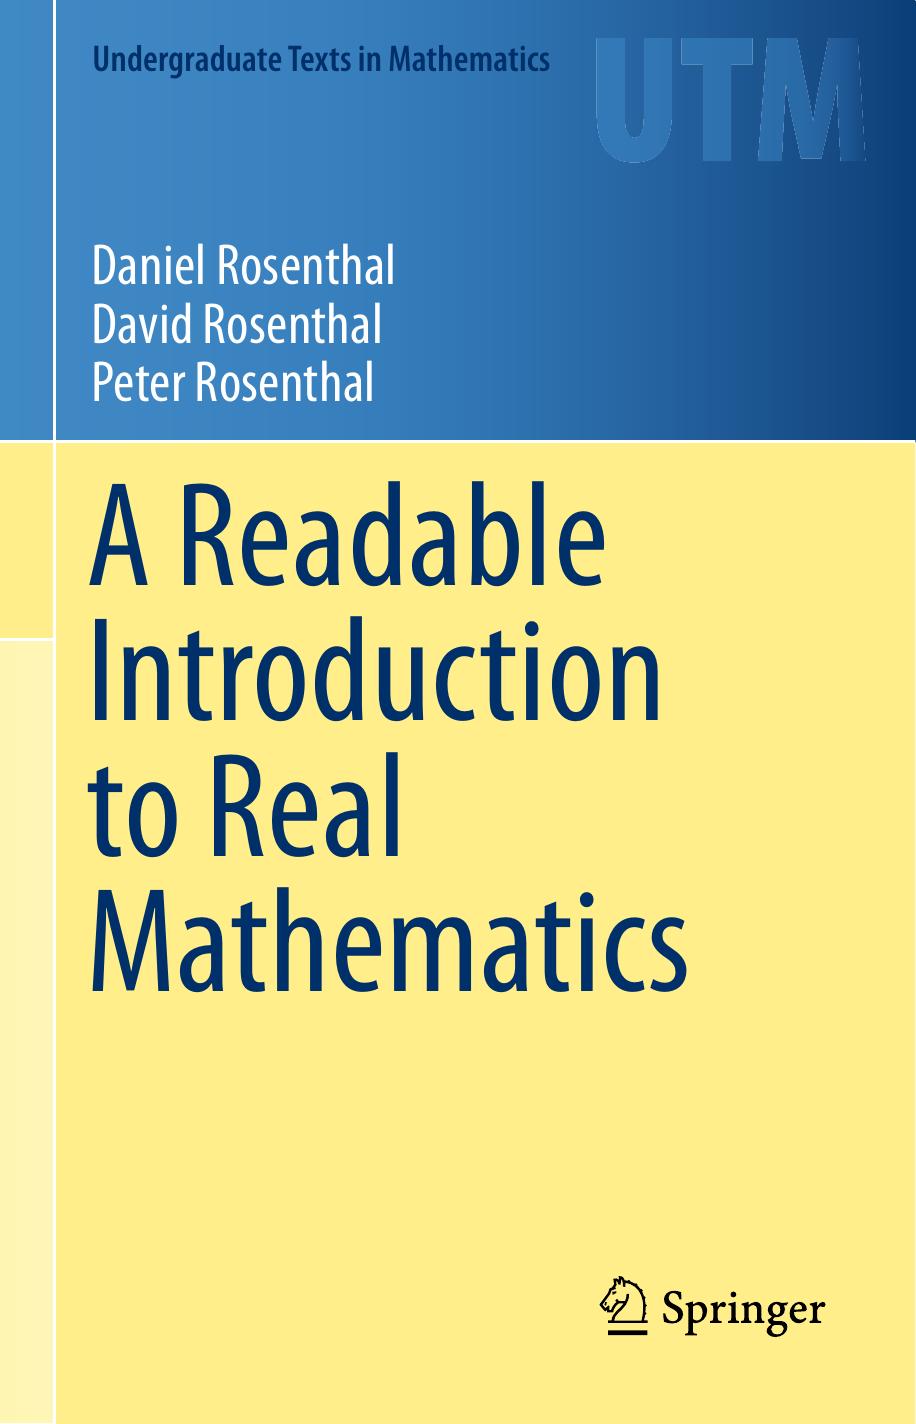 (eBook PDF)A Readable Introduction to Real Mathematics by Daniel Rosenthal,David Rosenthal